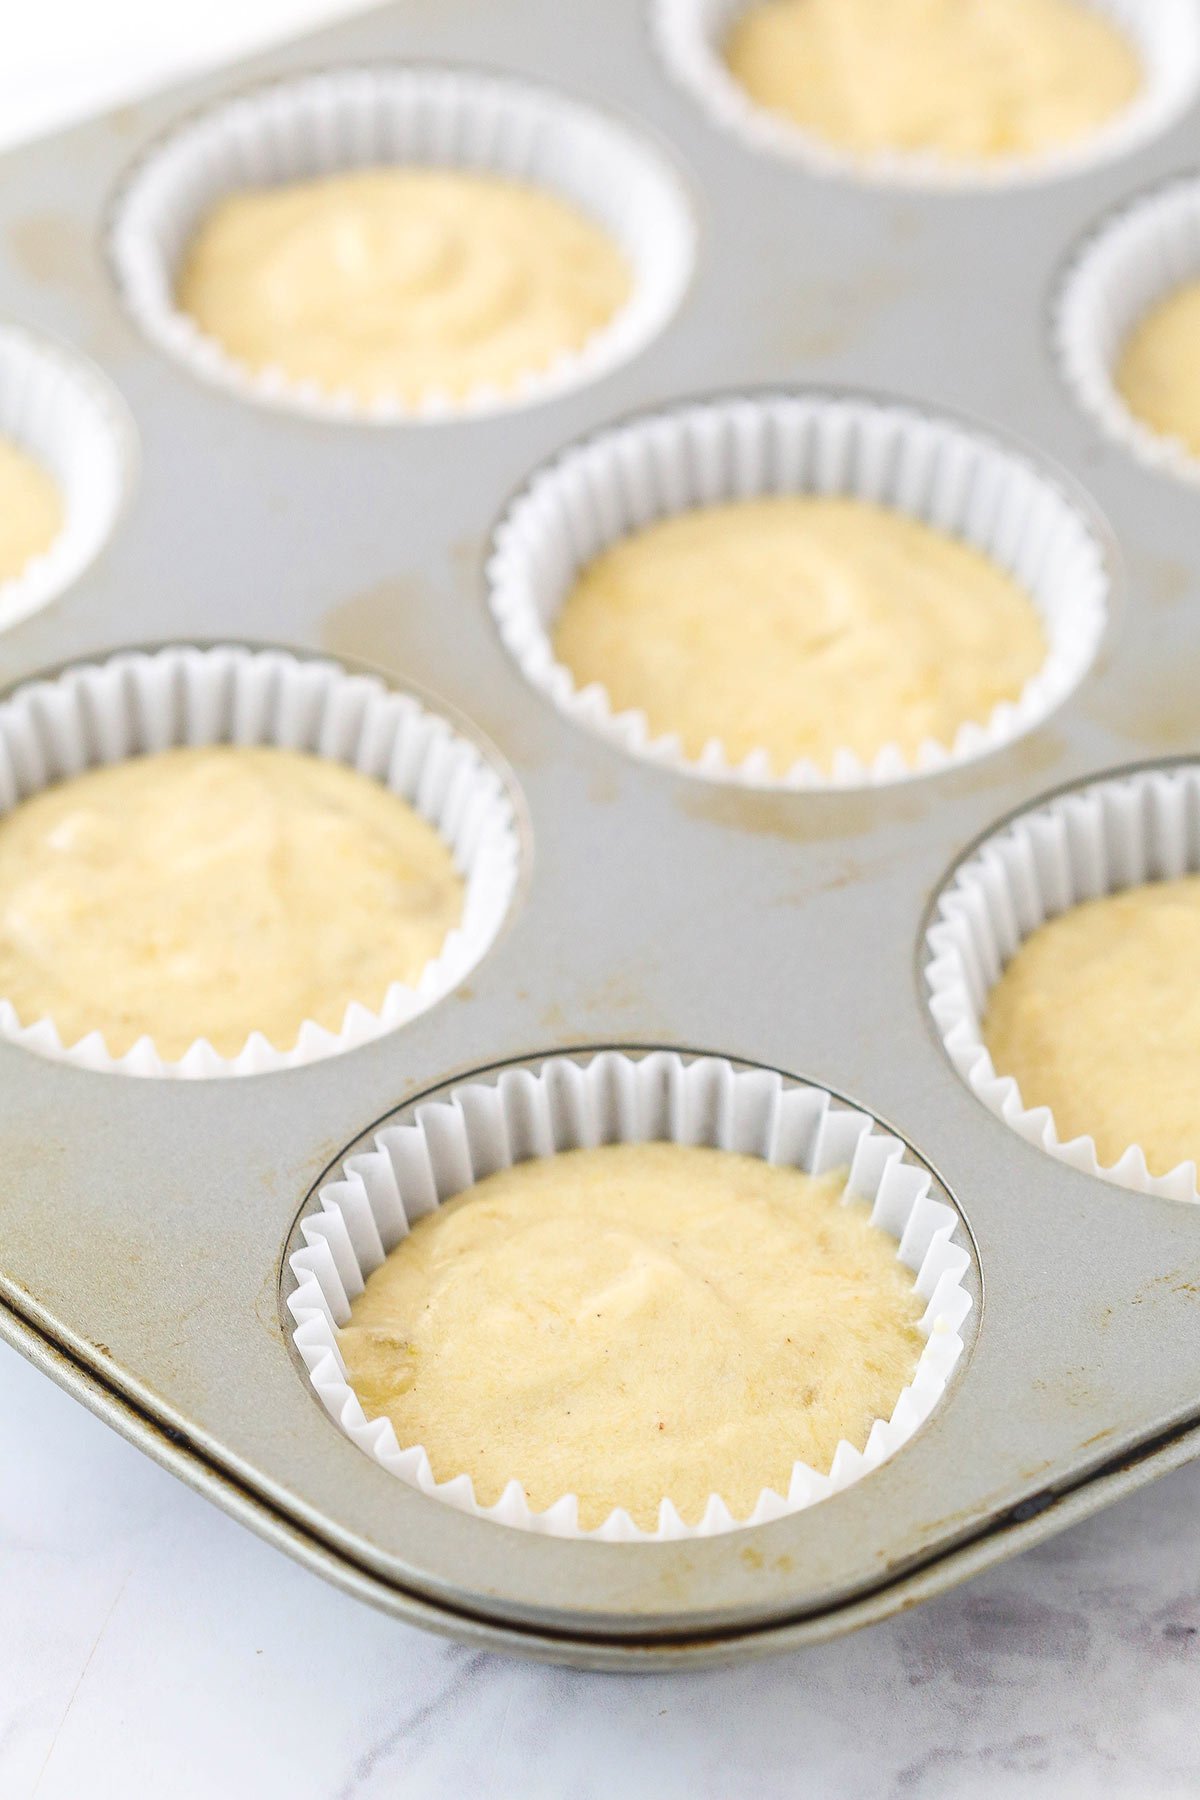 Filled cupcake liners with batter.